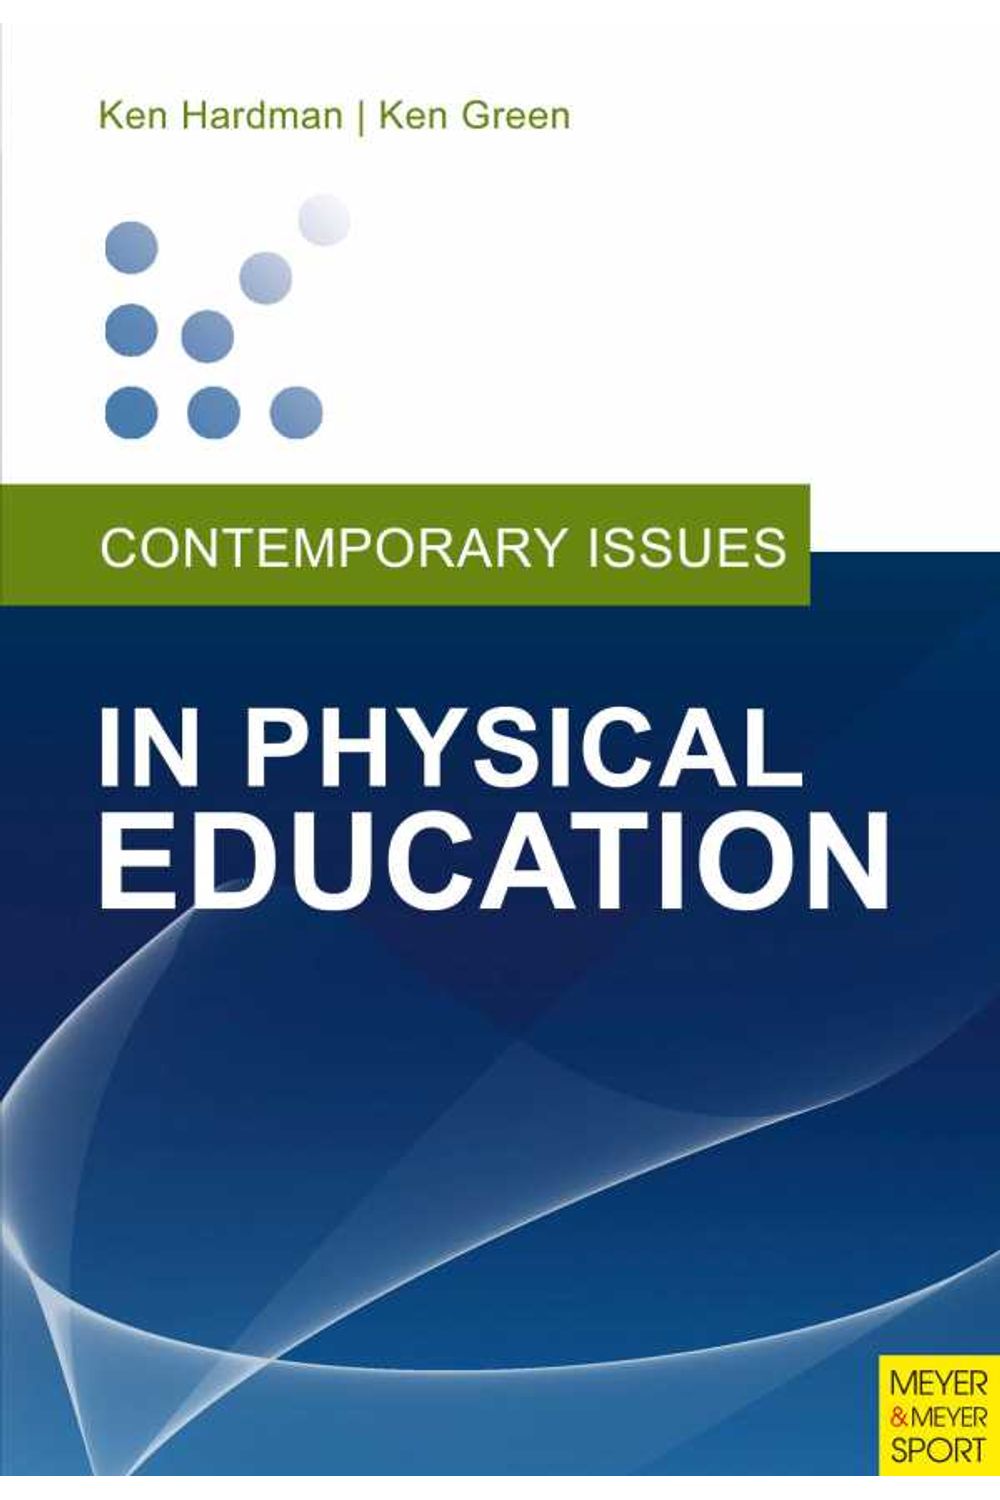 bw-contemporary-issues-in-physical-education-meyer-meyer-sport-9781841264813